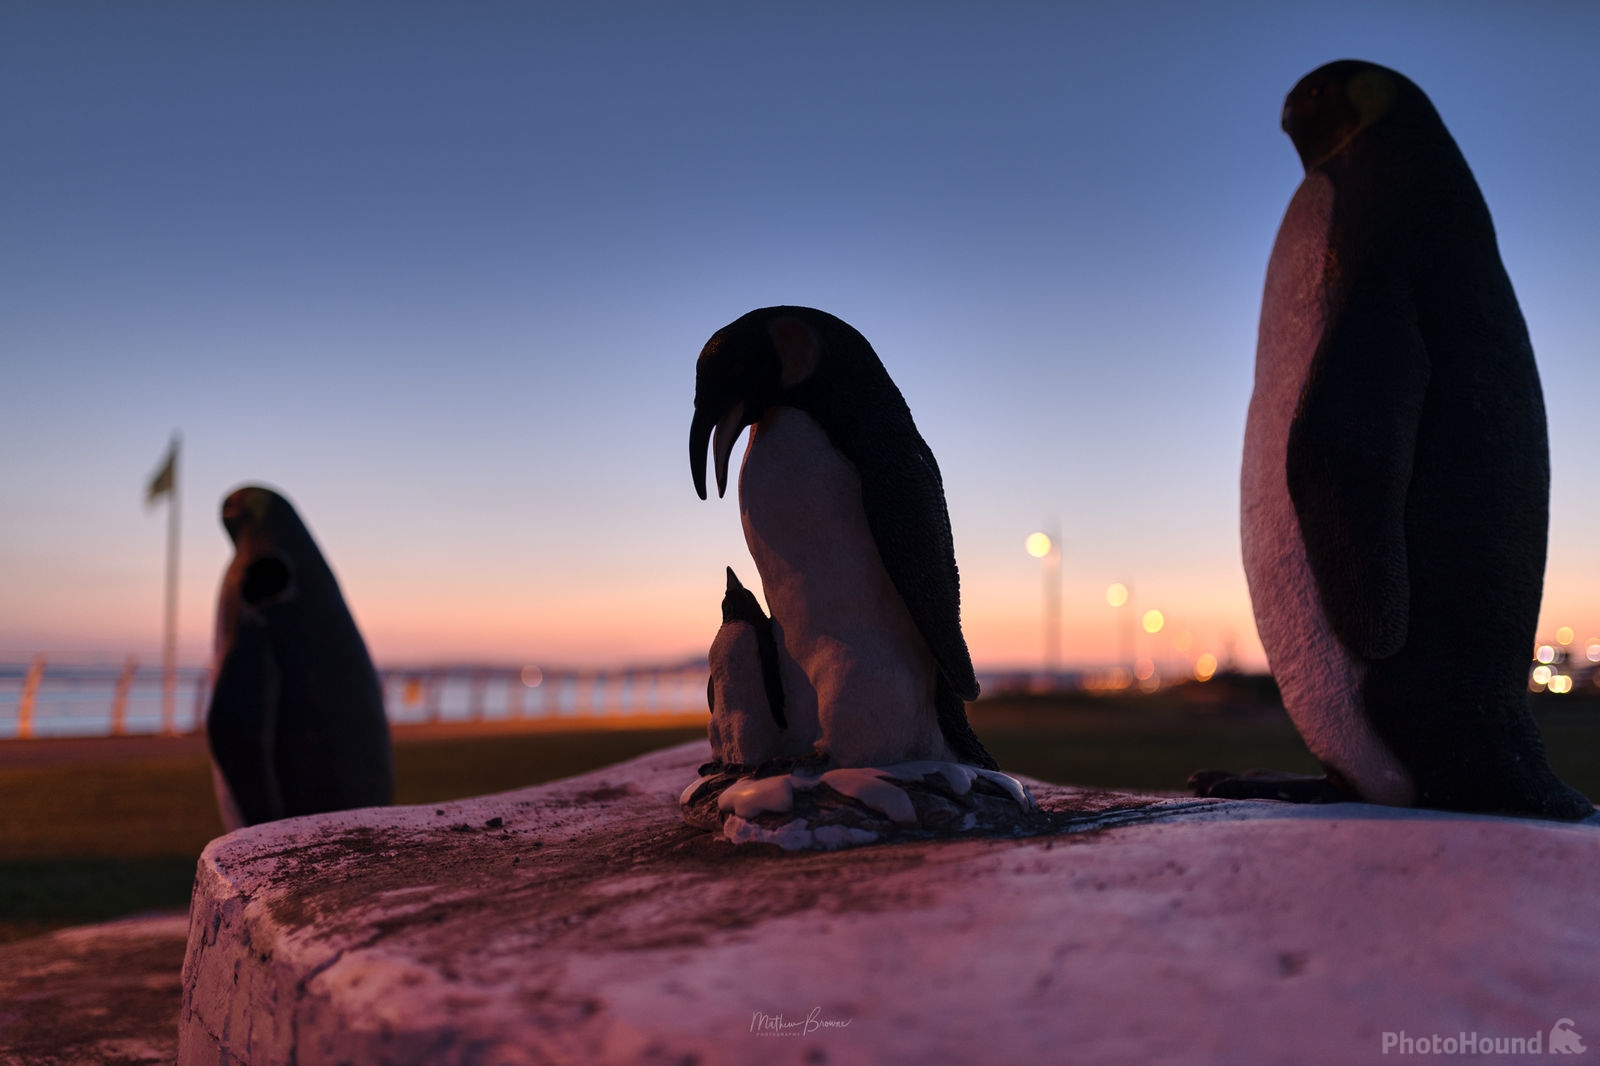 Image of Whale & Penguins by Mathew Browne